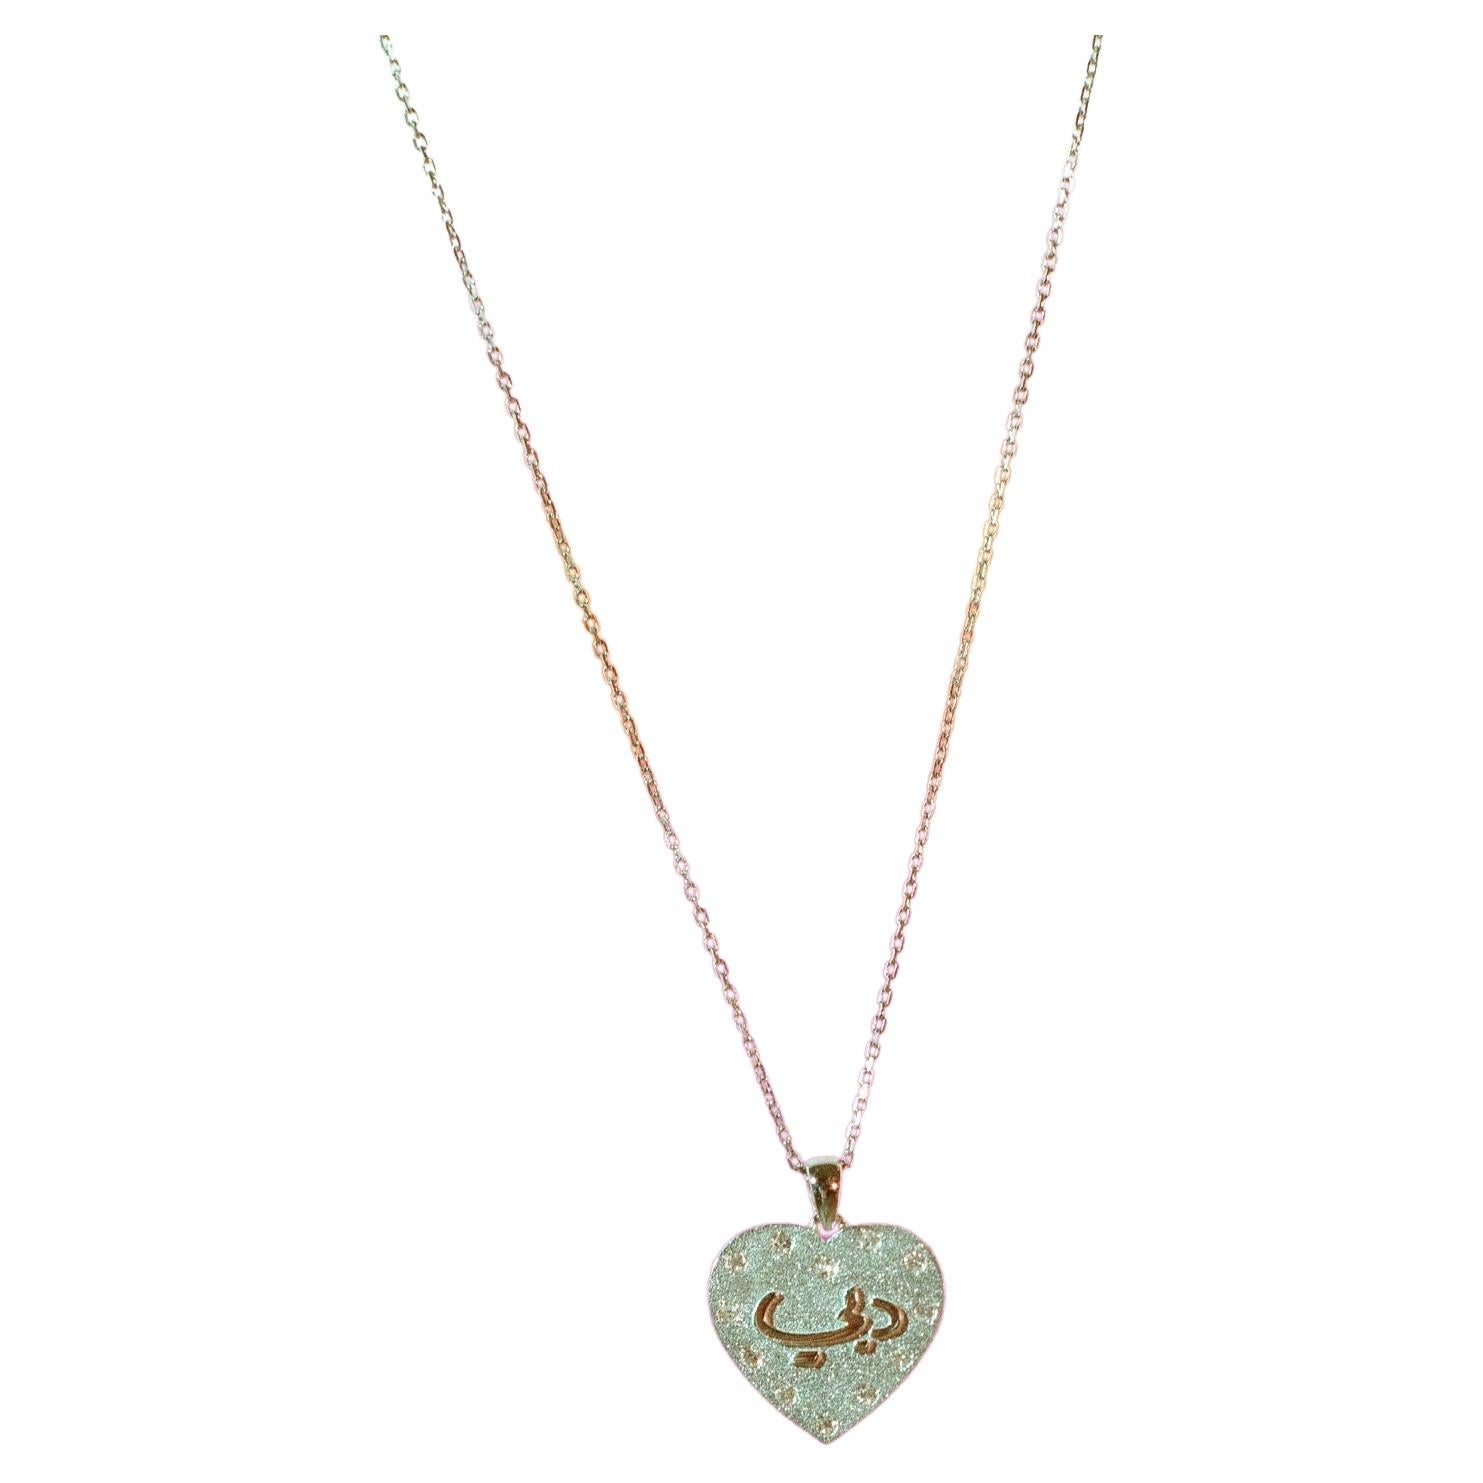 Heart shaped white 18k Gold  adjustable chain Necklace.  